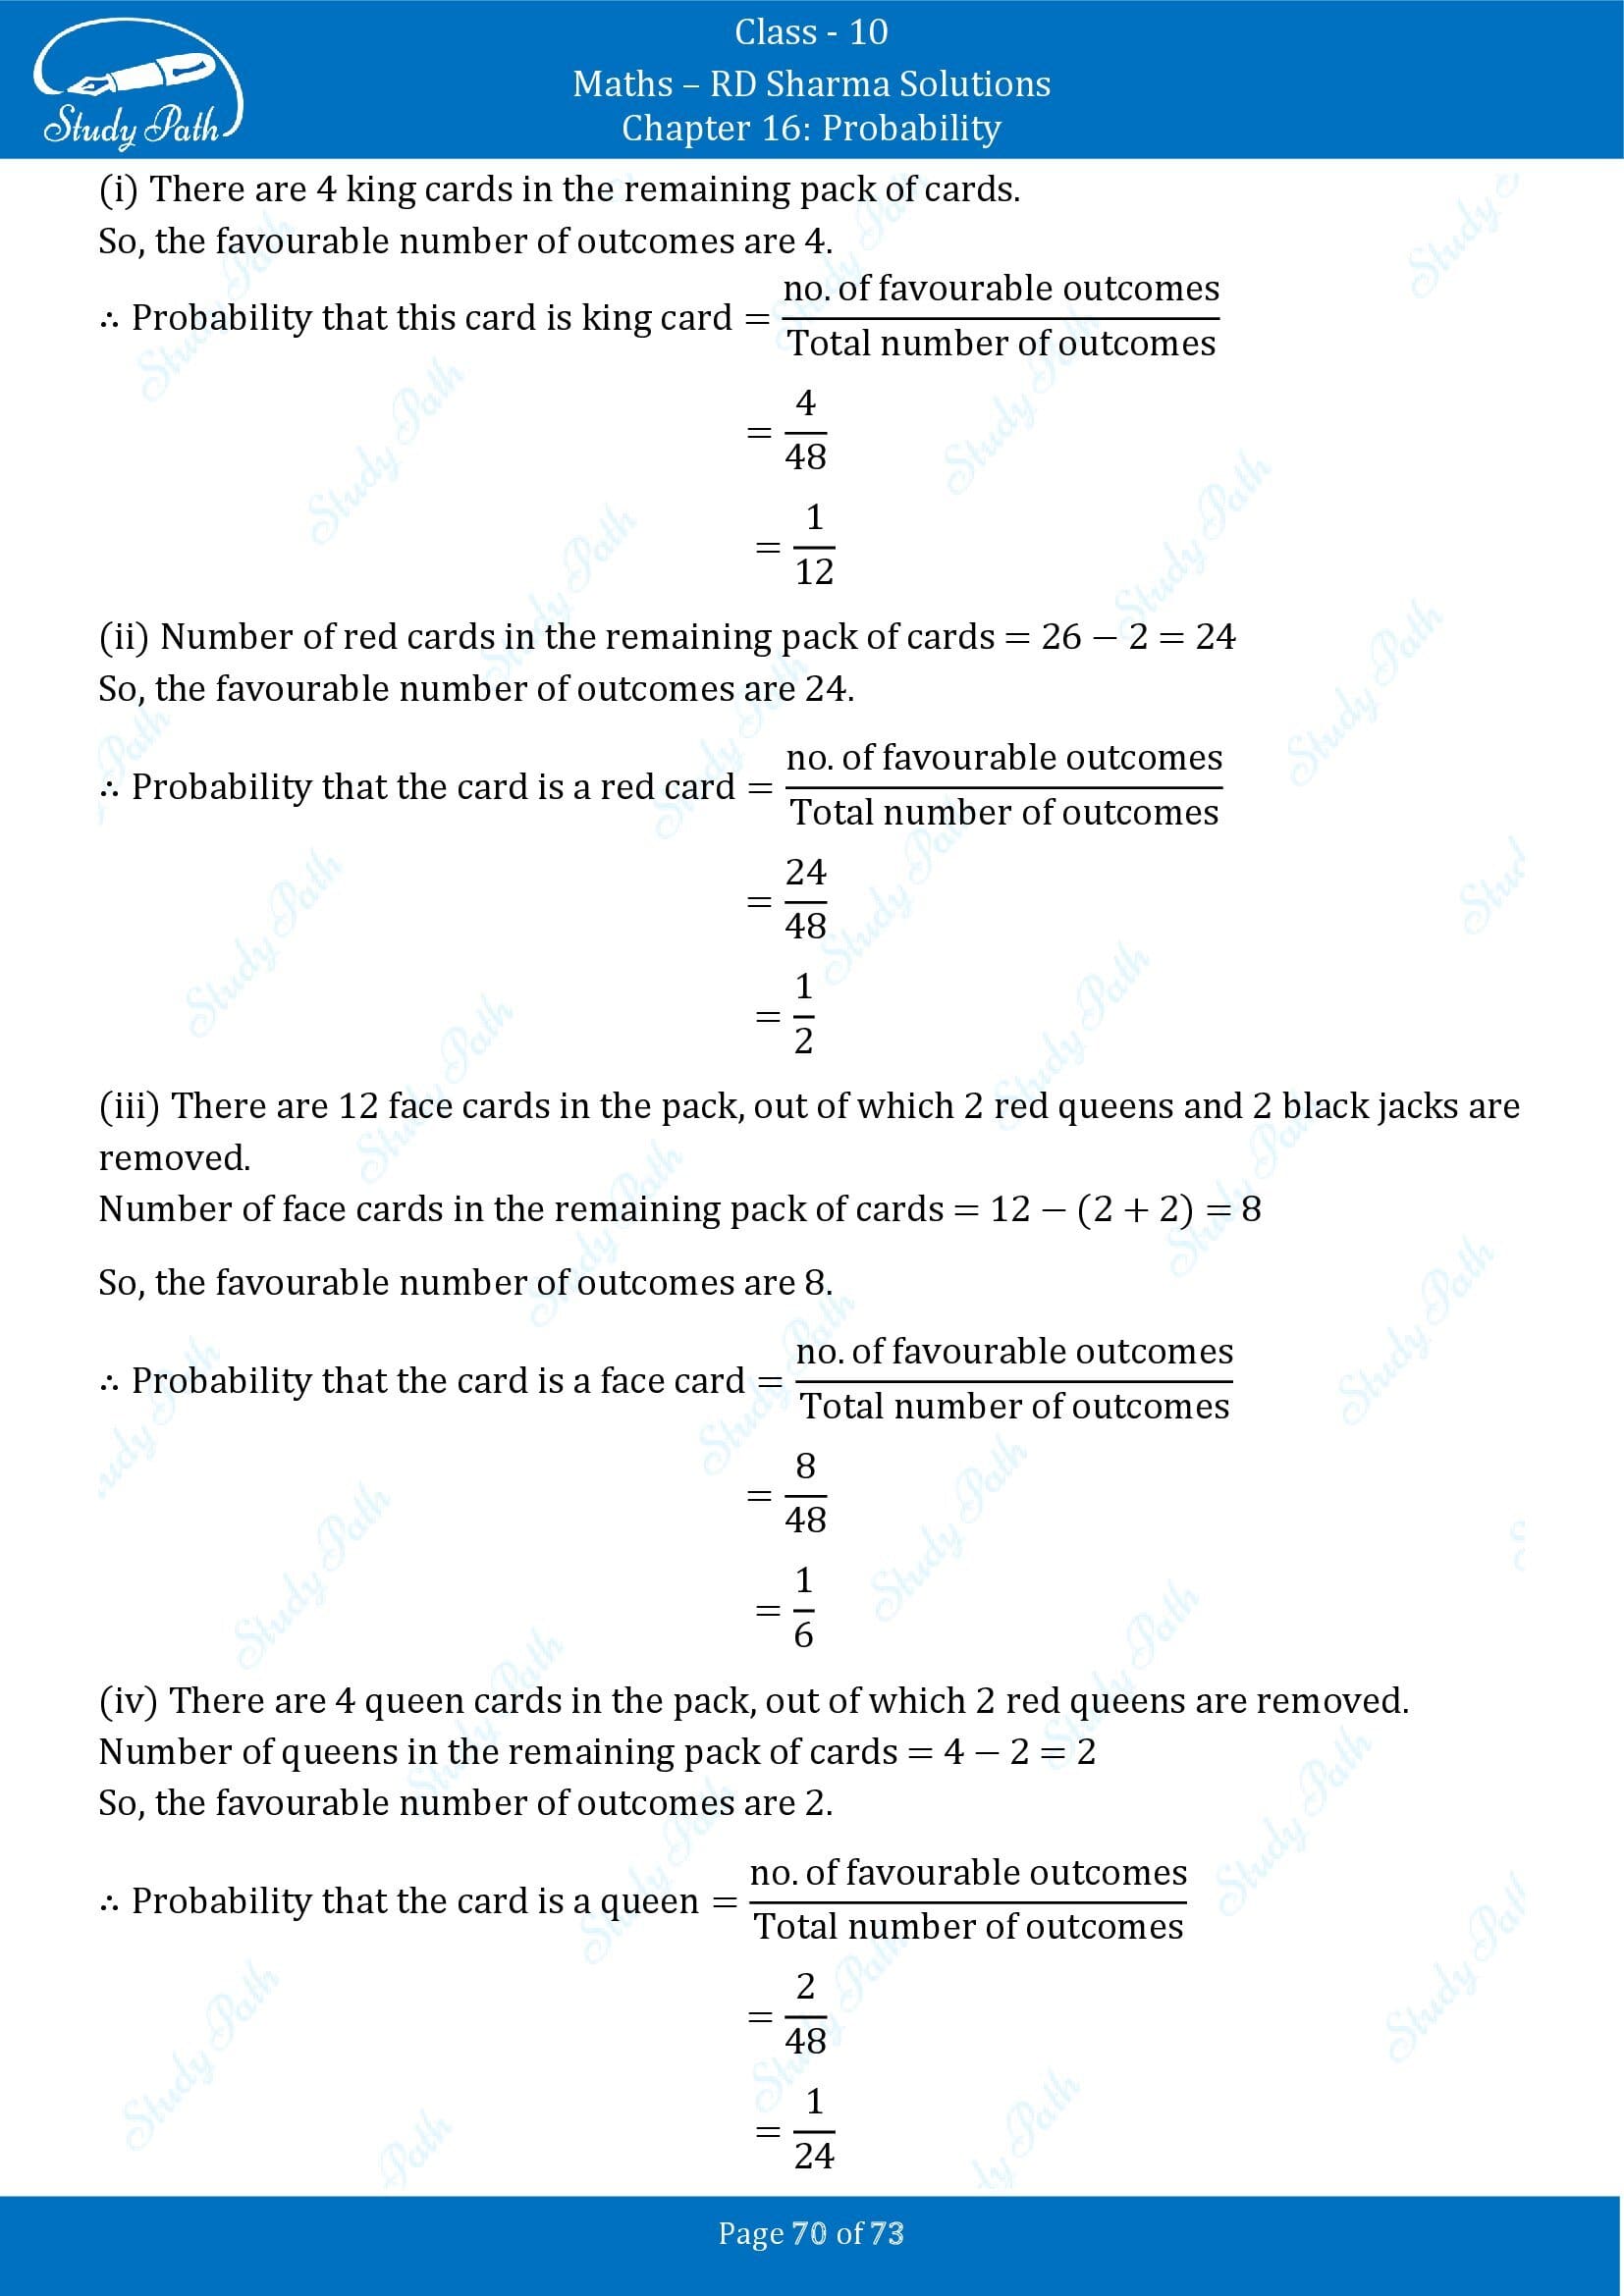 RD Sharma Solutions Class 10 Chapter 16 Probability Exercise 16.1 00070